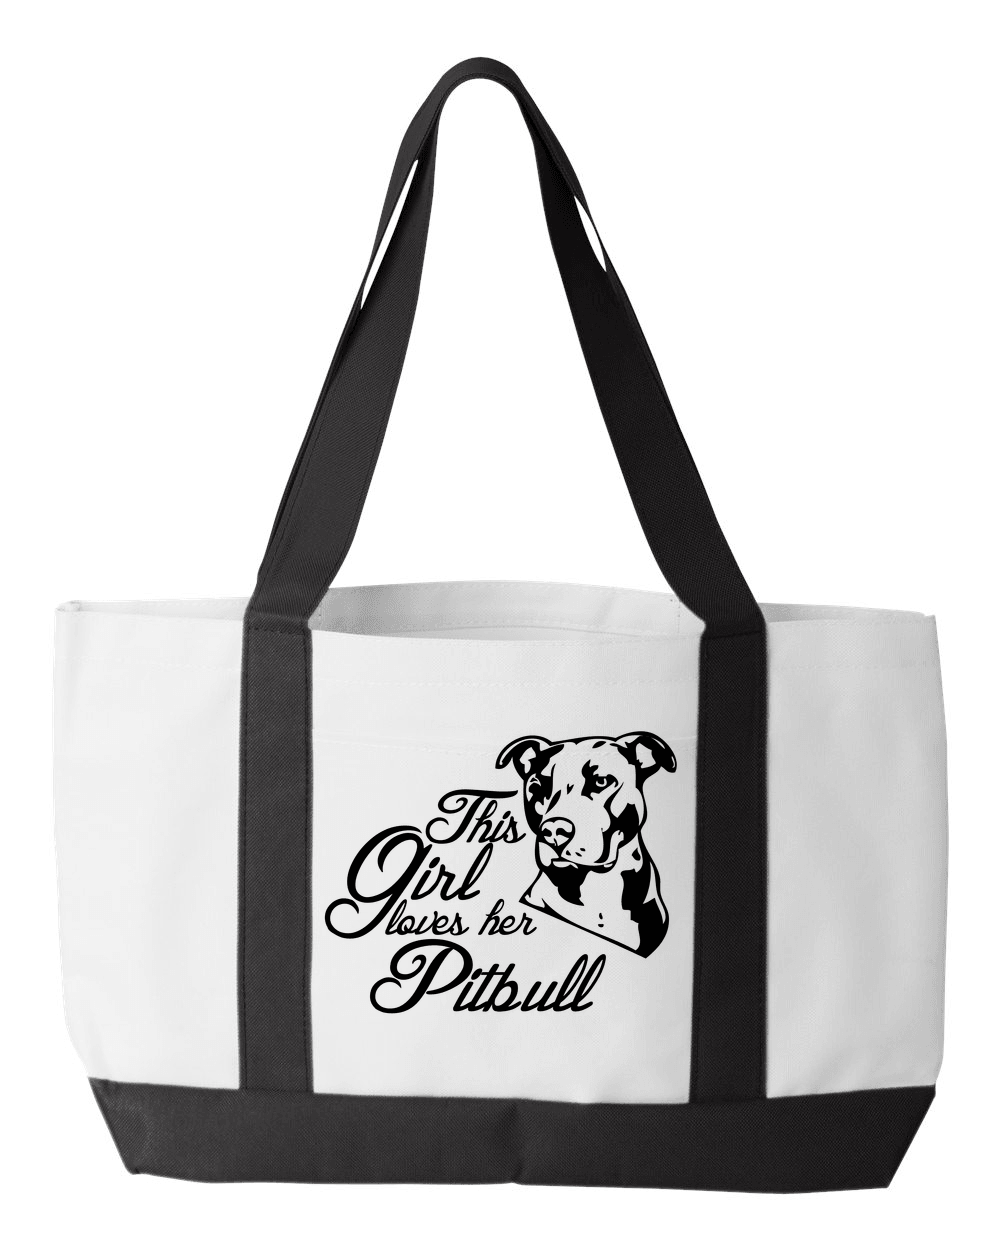 Designs by MyUtopia Shout Out:This Girl Loves Her Pitbull Canvas Totebag Gym / Beach / Pool Gear Bag,White,Gym Totebag